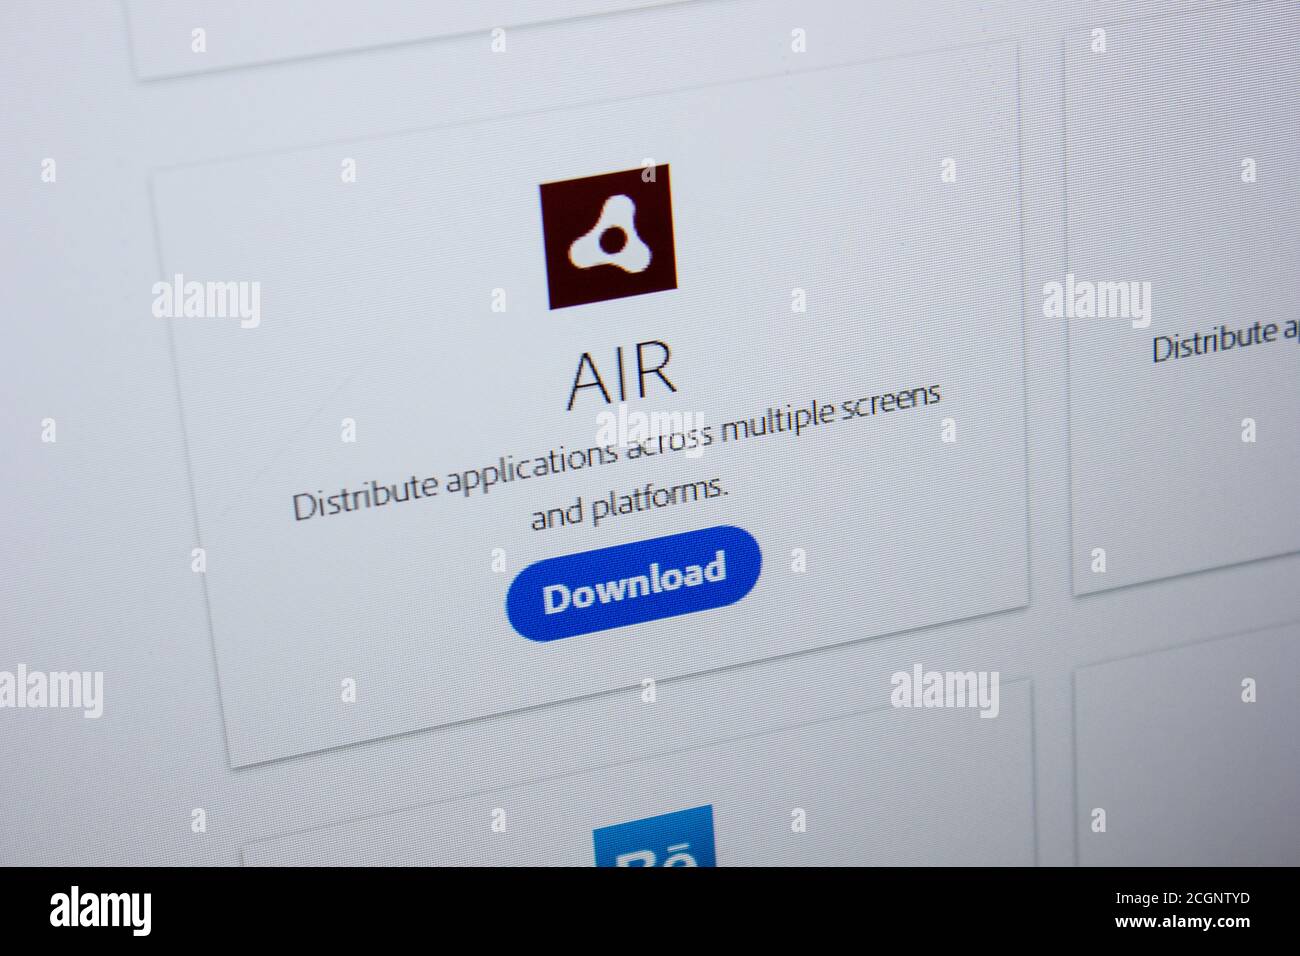 Ryazan, Russia - July 11, 2018: Adobe AIR SDK, software logo on the official website of Adobe Stock Photo